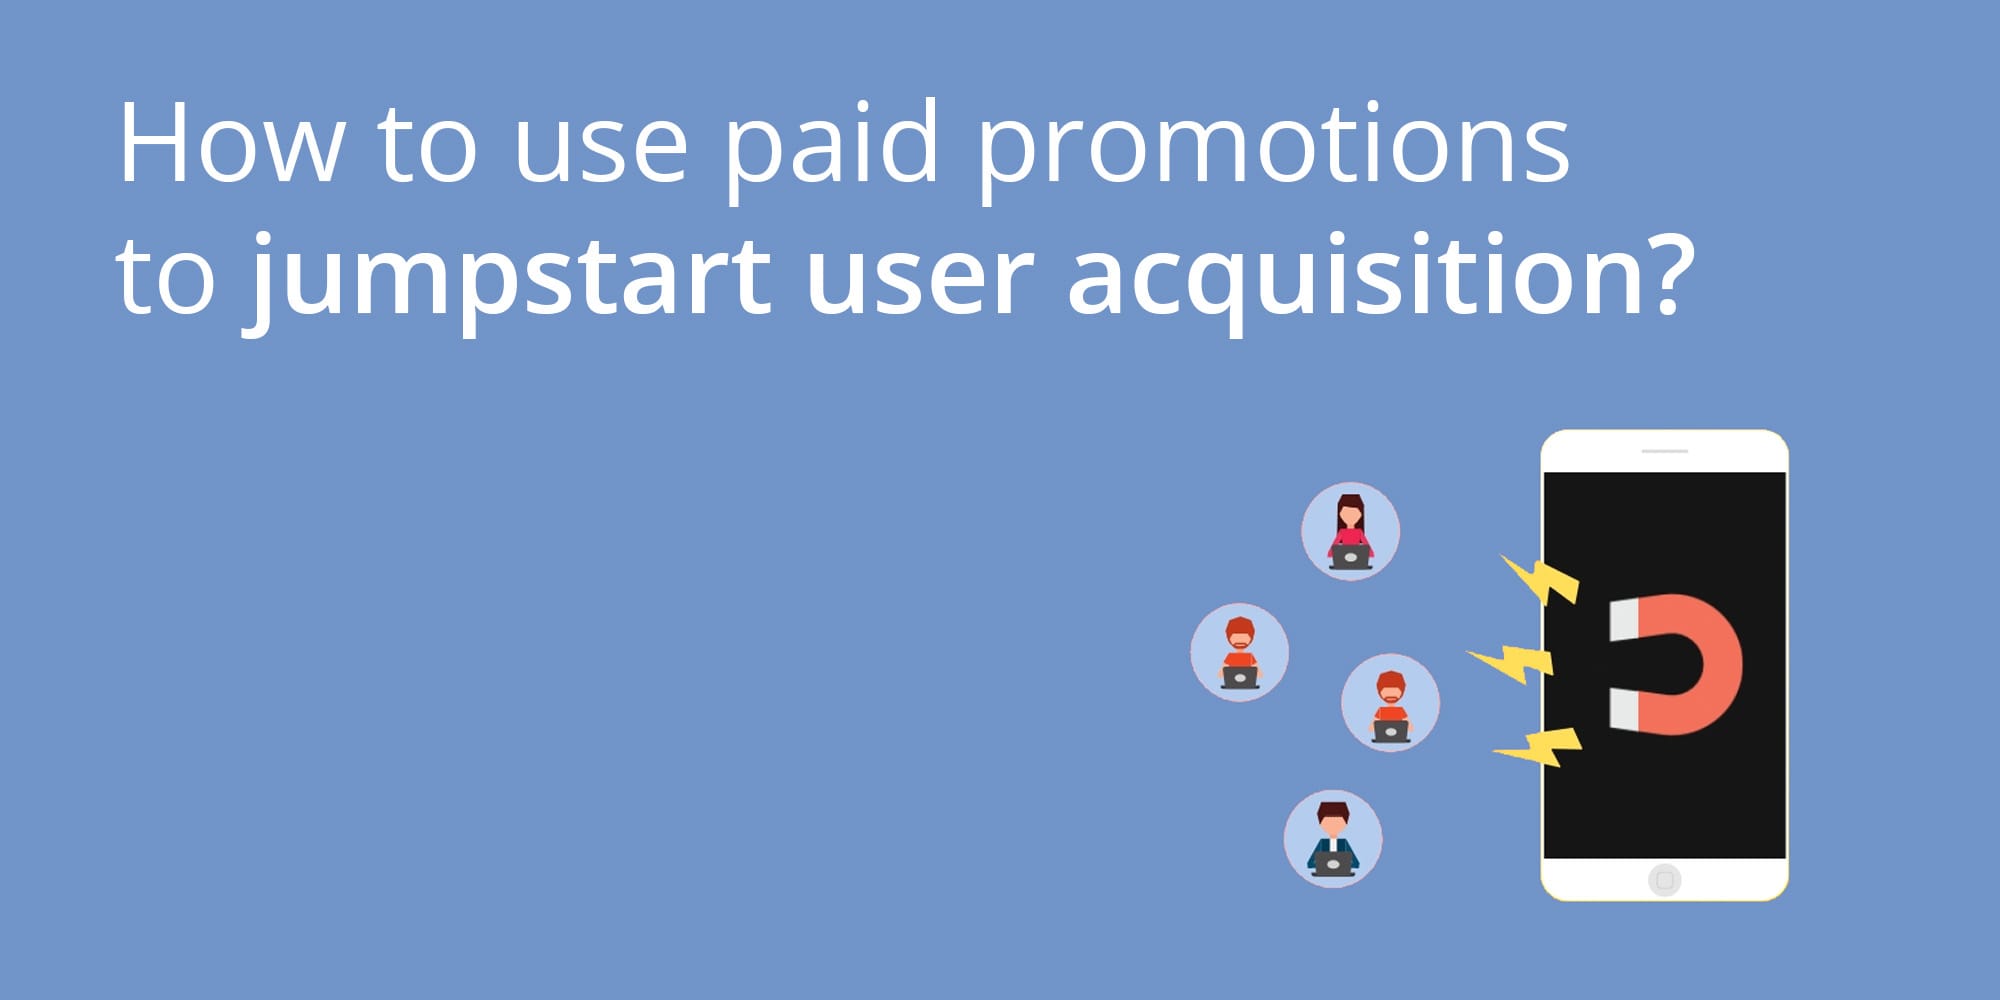 How to use paid promotions to jumpstart user acquisition?